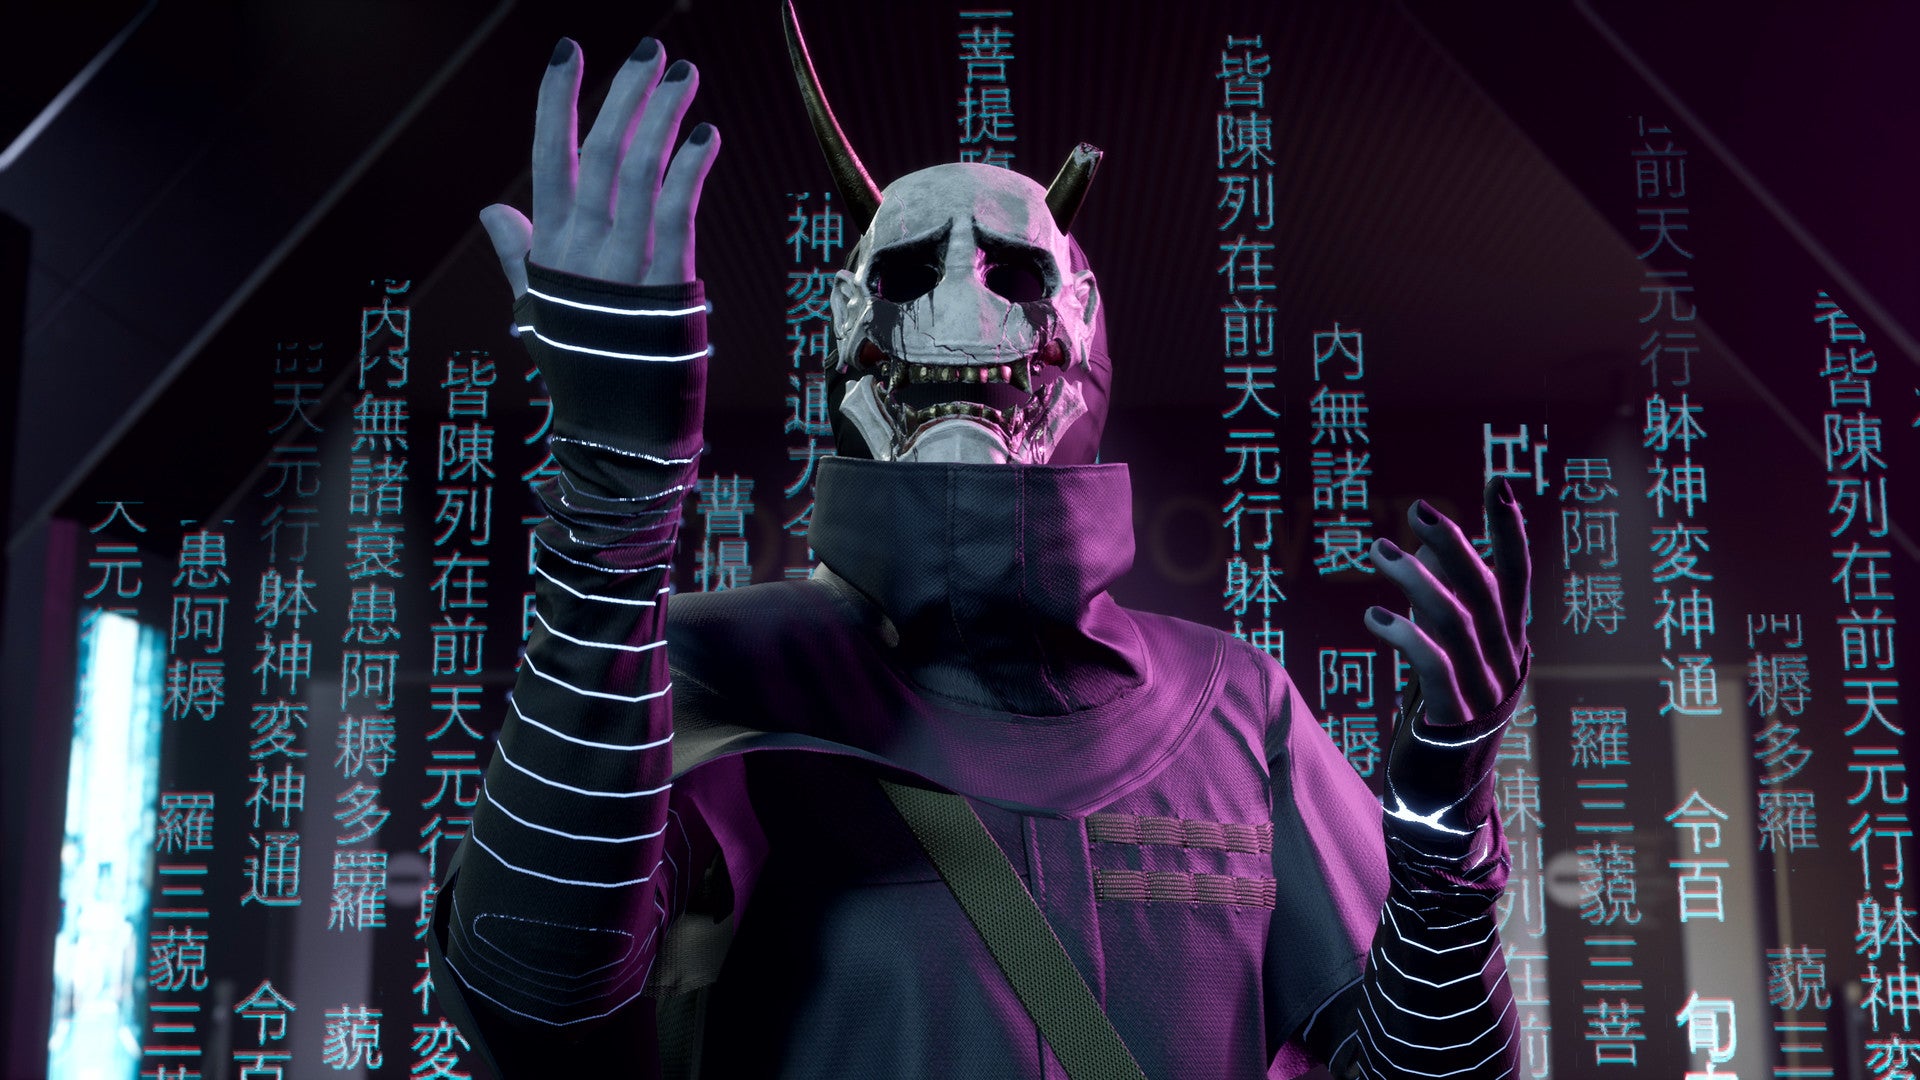 A promotional image of Hannya Man, the main antagonist from Ghostwire: Tokyo.